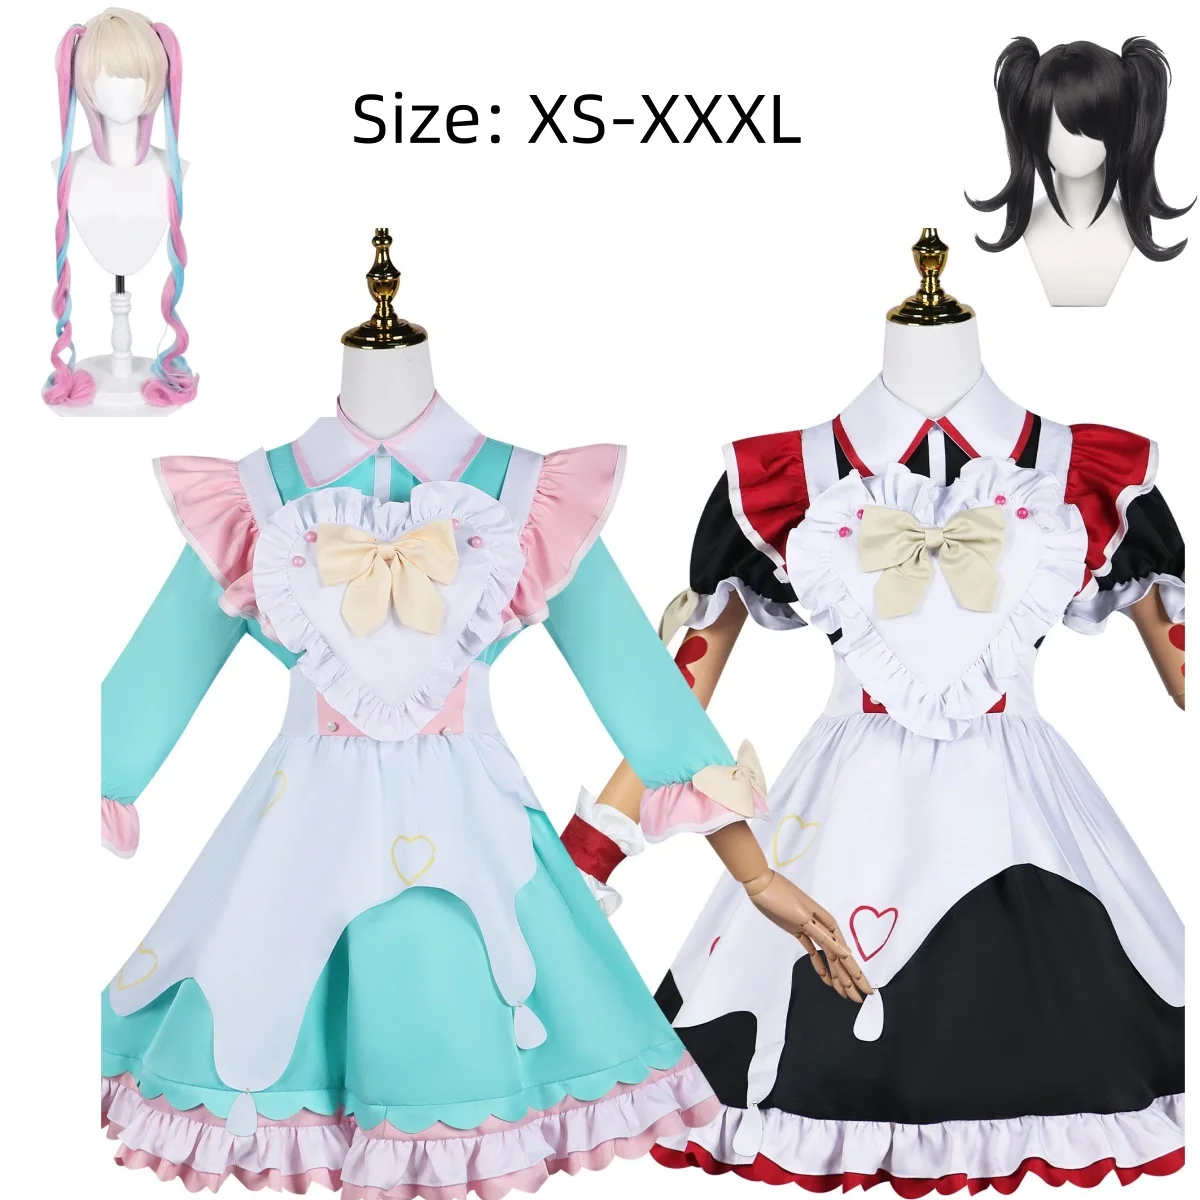 

KAngel Ame Chan Cosplay Costume Game NEEDY GIRL OVERDOSE Dress Dessert Paradise Maid Dress Women Halloween Party Role Play Cos